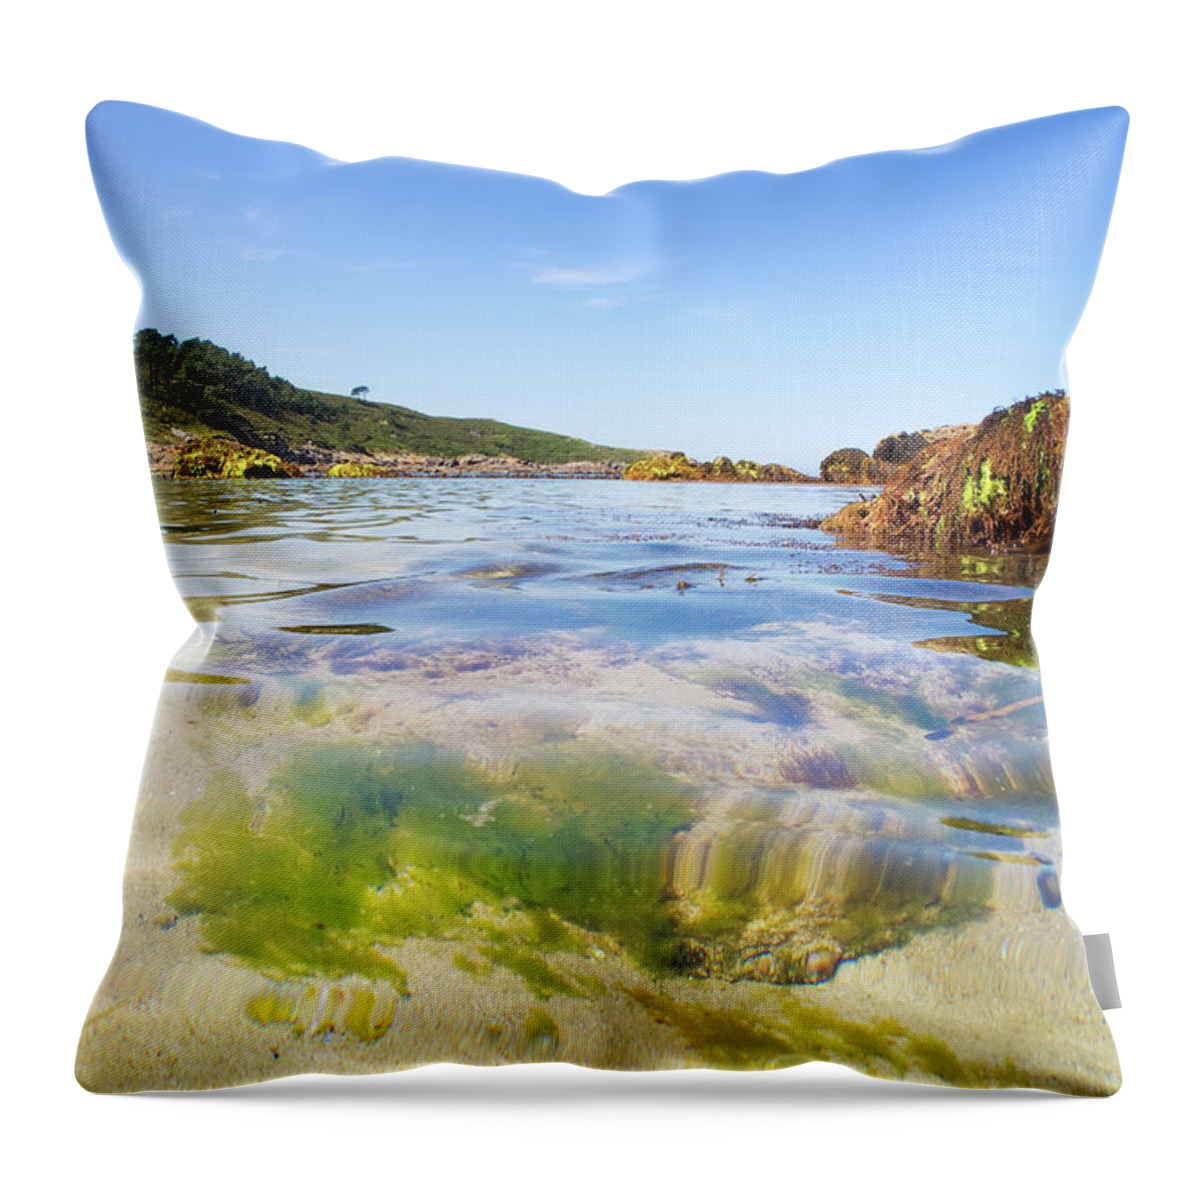 Tranquility Throw Pillow featuring the photograph Surface Sea Water by Ramón Espelt Photography